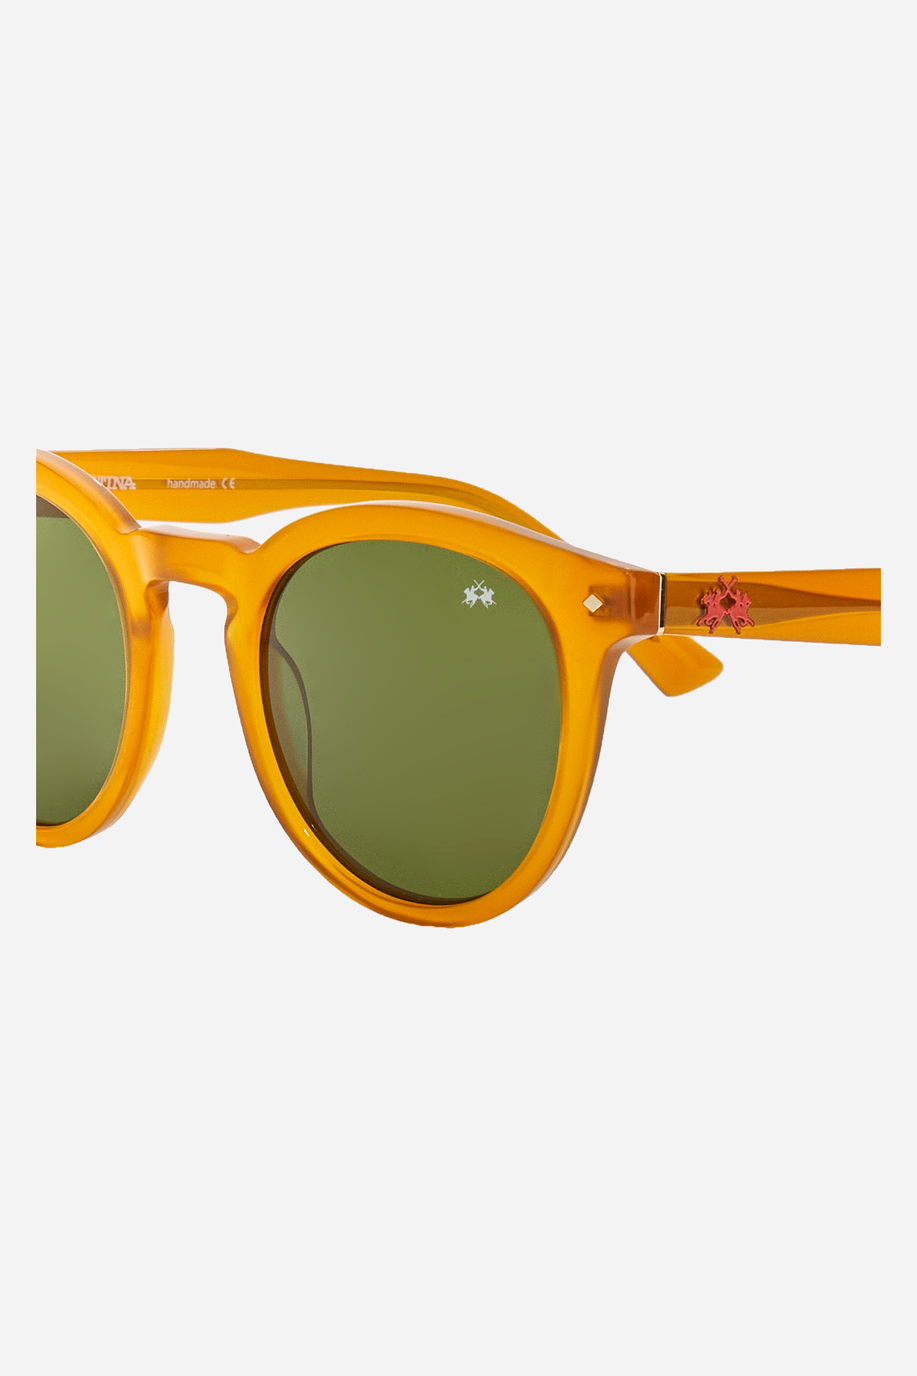 Round model sunglasses - Small gifts for her | La Martina - Official Online Shop